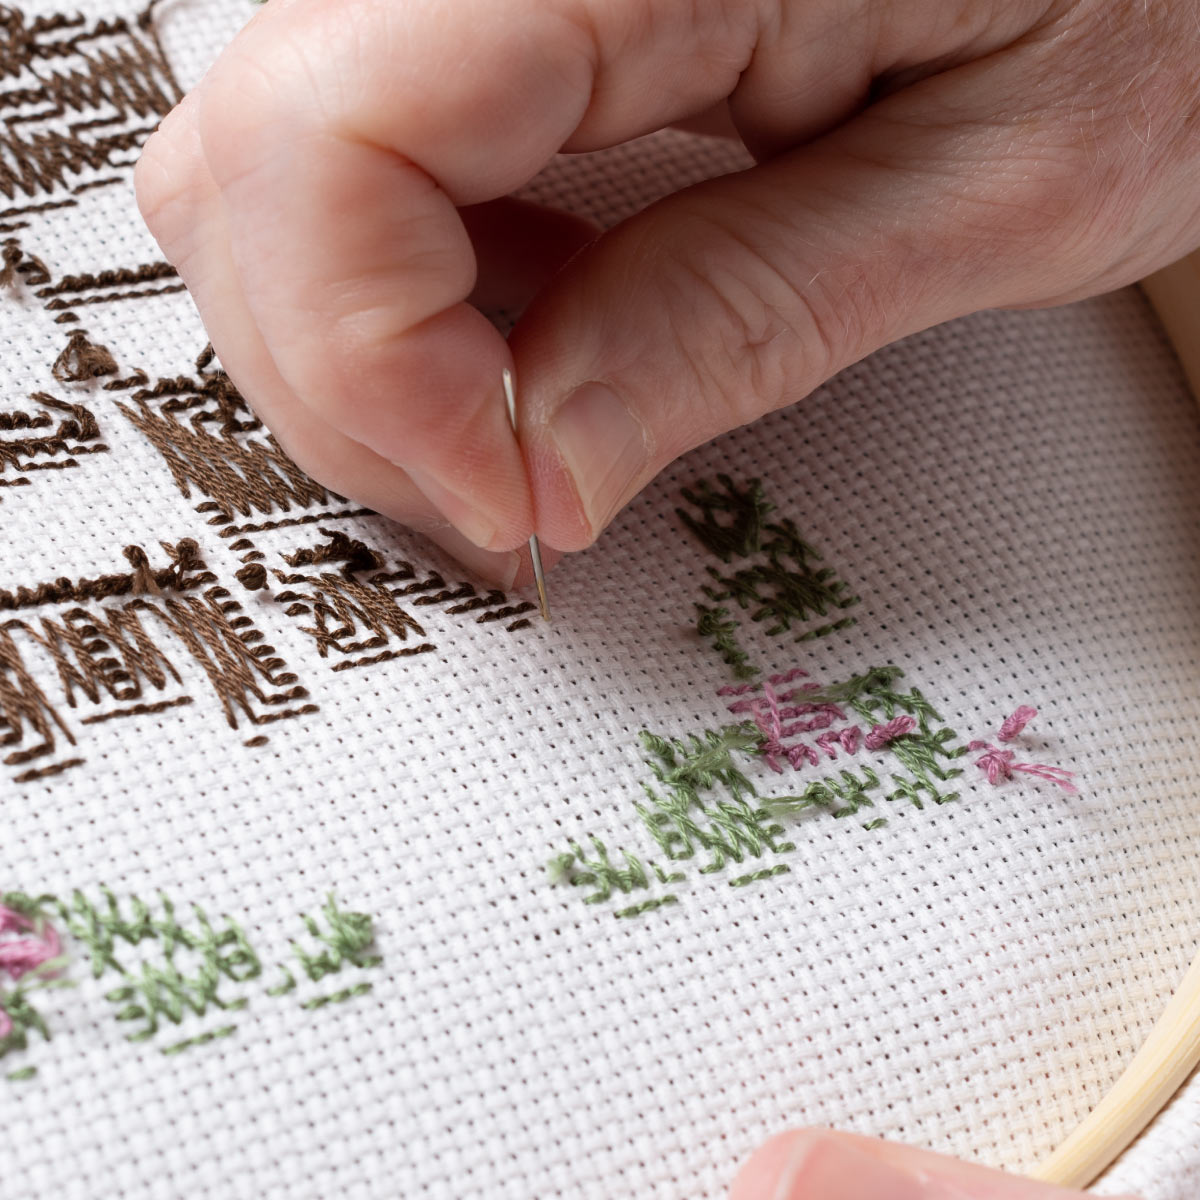 How to stitch easy with embroidery